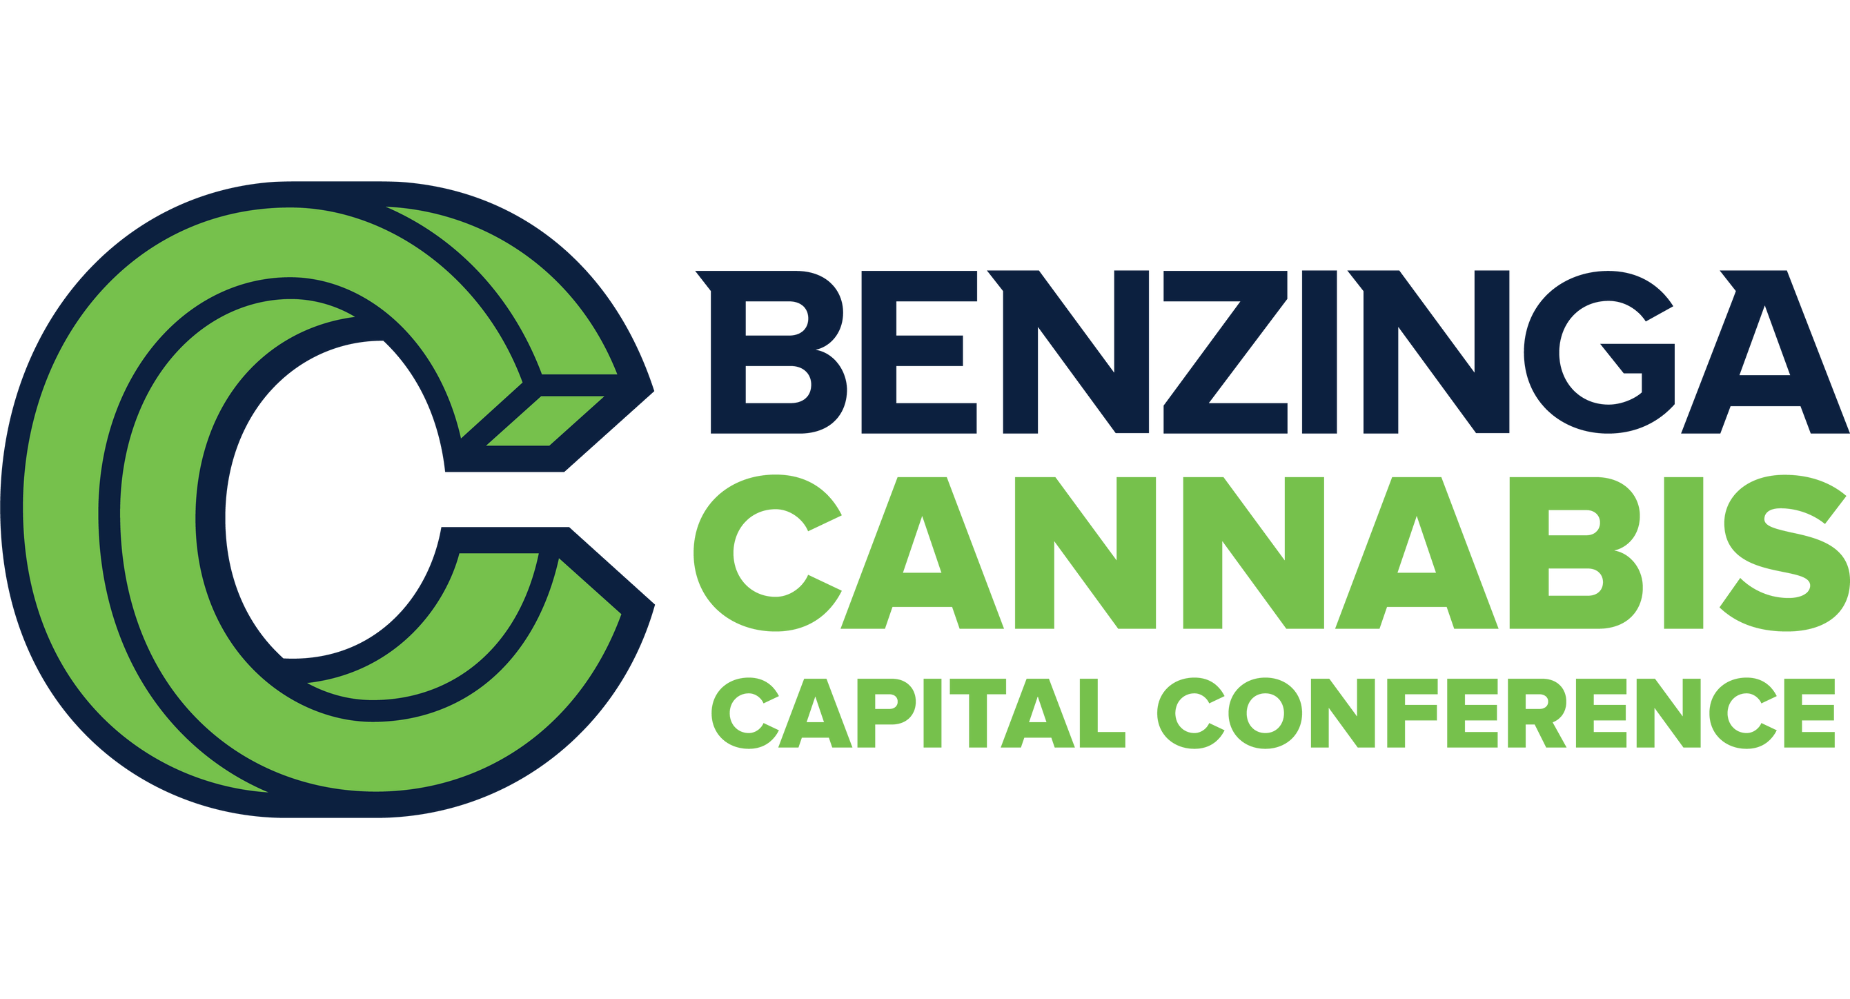 CEO Of Agrify, Leading Provider Of Innovative Cannabis Cultivation Solutions, Joins The Benzinga Cannabis Capital Conference